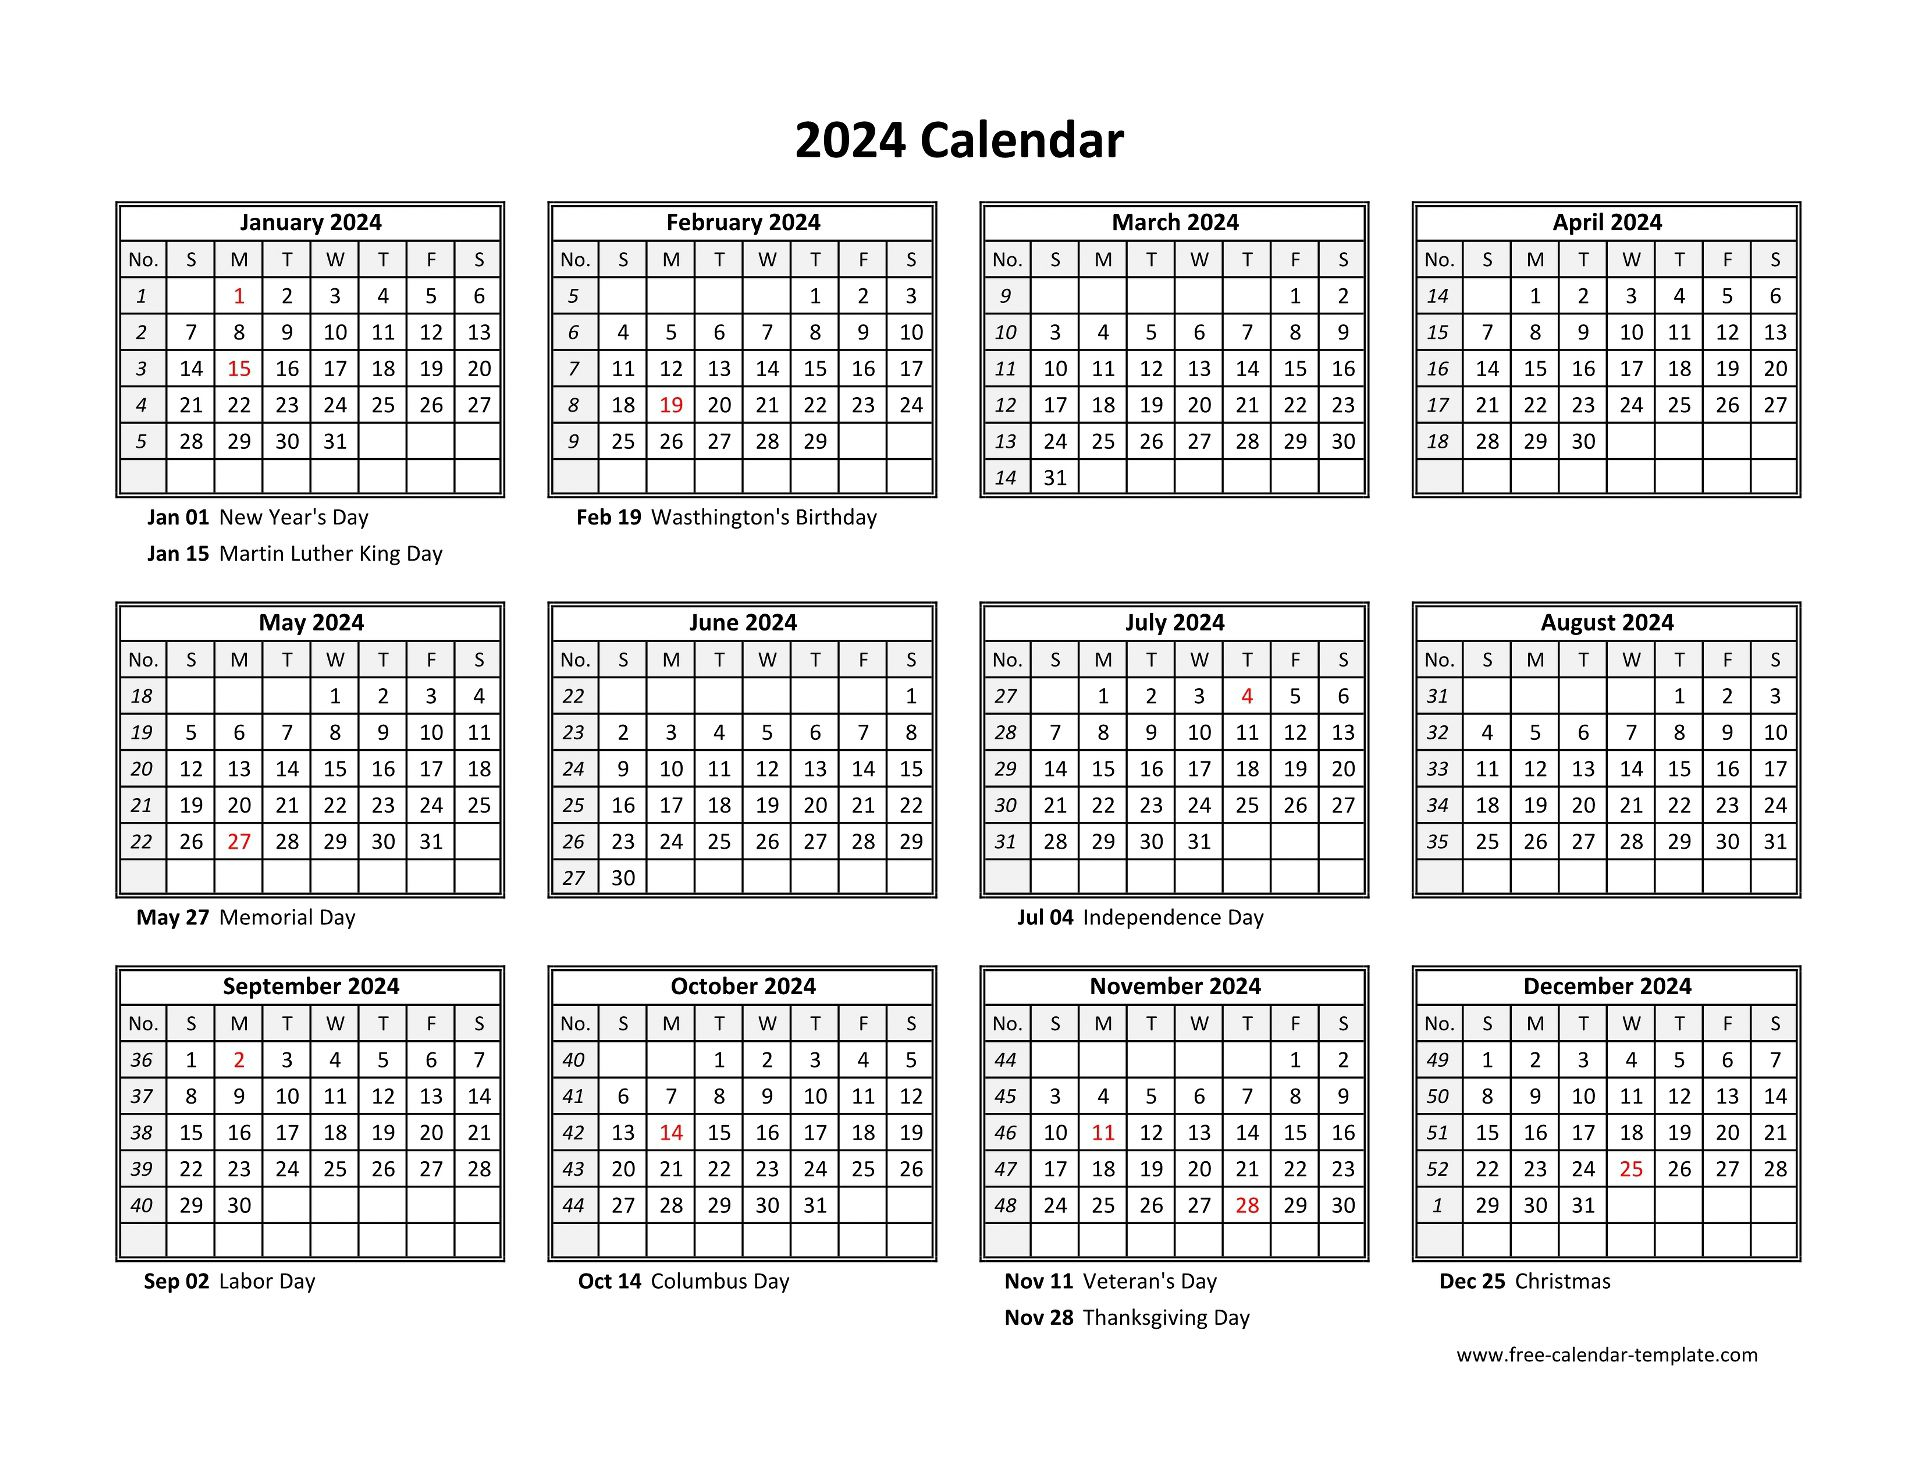 Printable Yearly Calendar 2024 | Free-Calendar-Template for Printable 2024 12 Month Calendar With Holidays